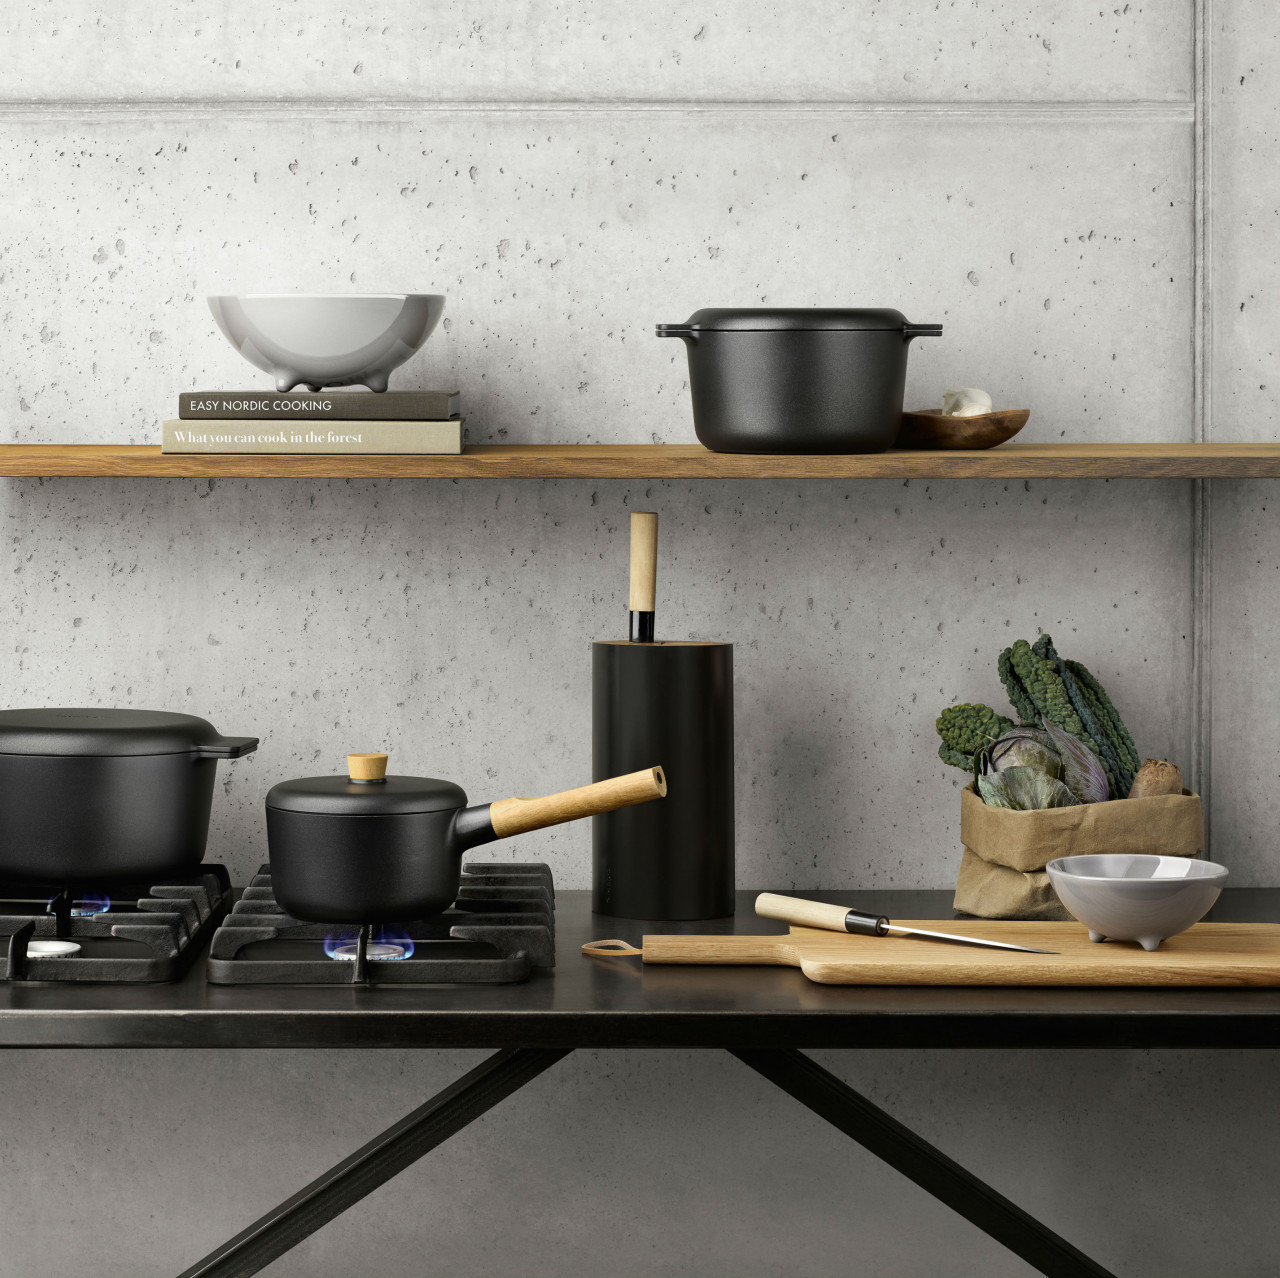 Infusing Nordic Design Into the Kitchen With Eva Solo Cookware